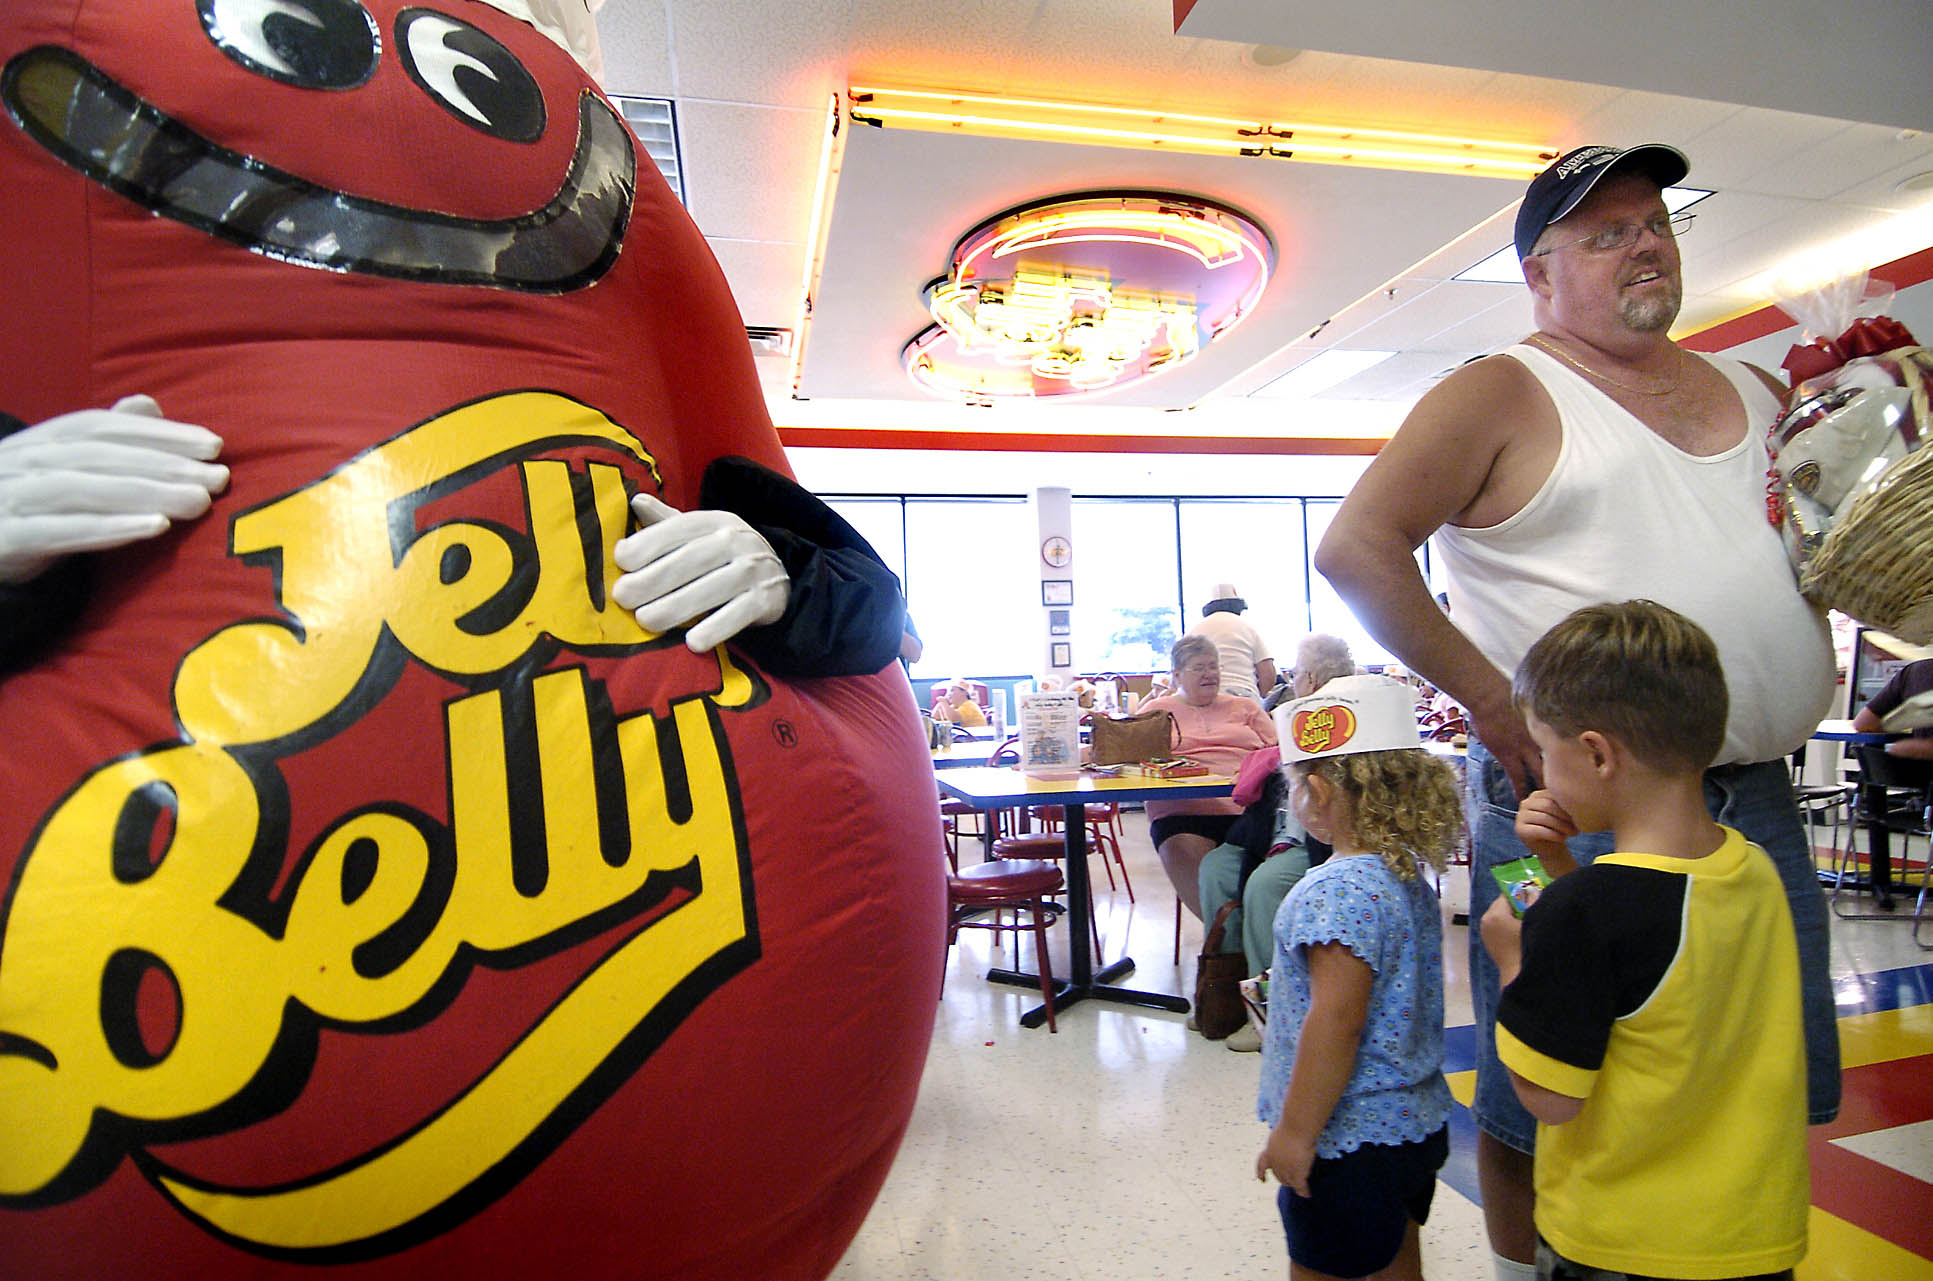 Michael Lively of Hammond, Ind., stands near the Mr. Jelly Belly mascot at the Jelly Belly Center in Pleasant Prairie, Wis on July 26, 2006.